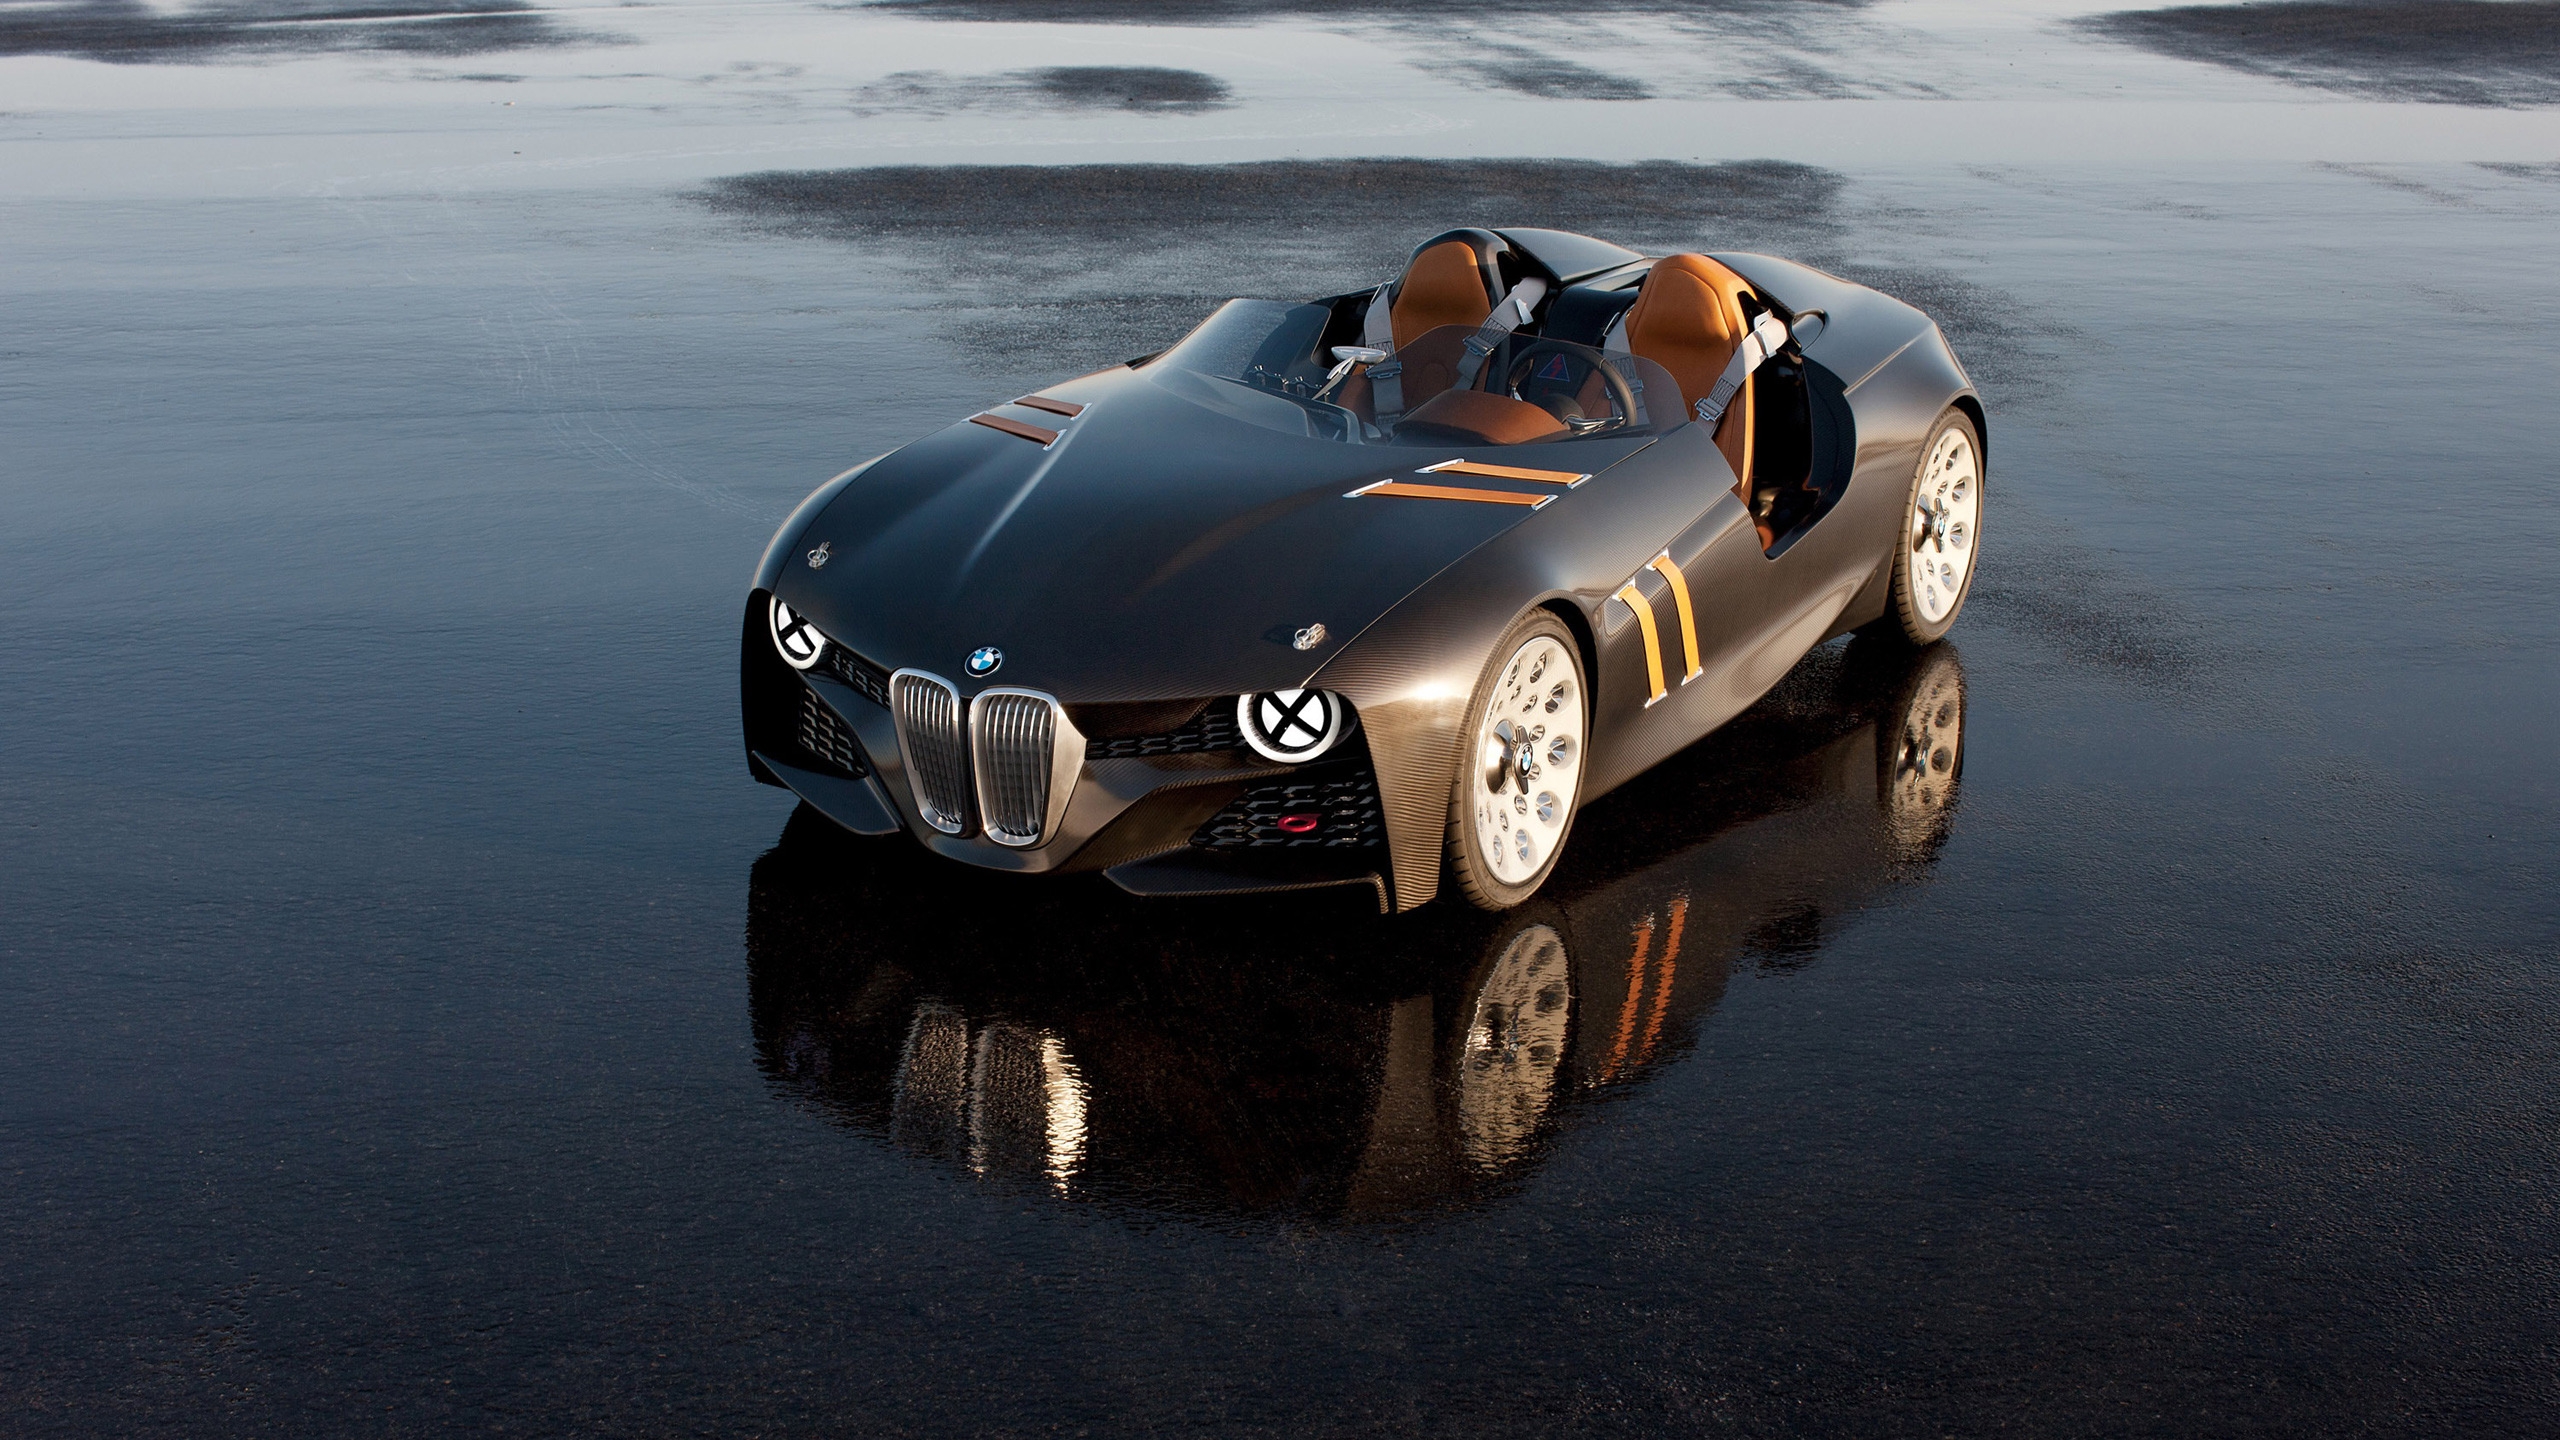 BMW 328 Hommage for 2560x1440 HDTV resolution